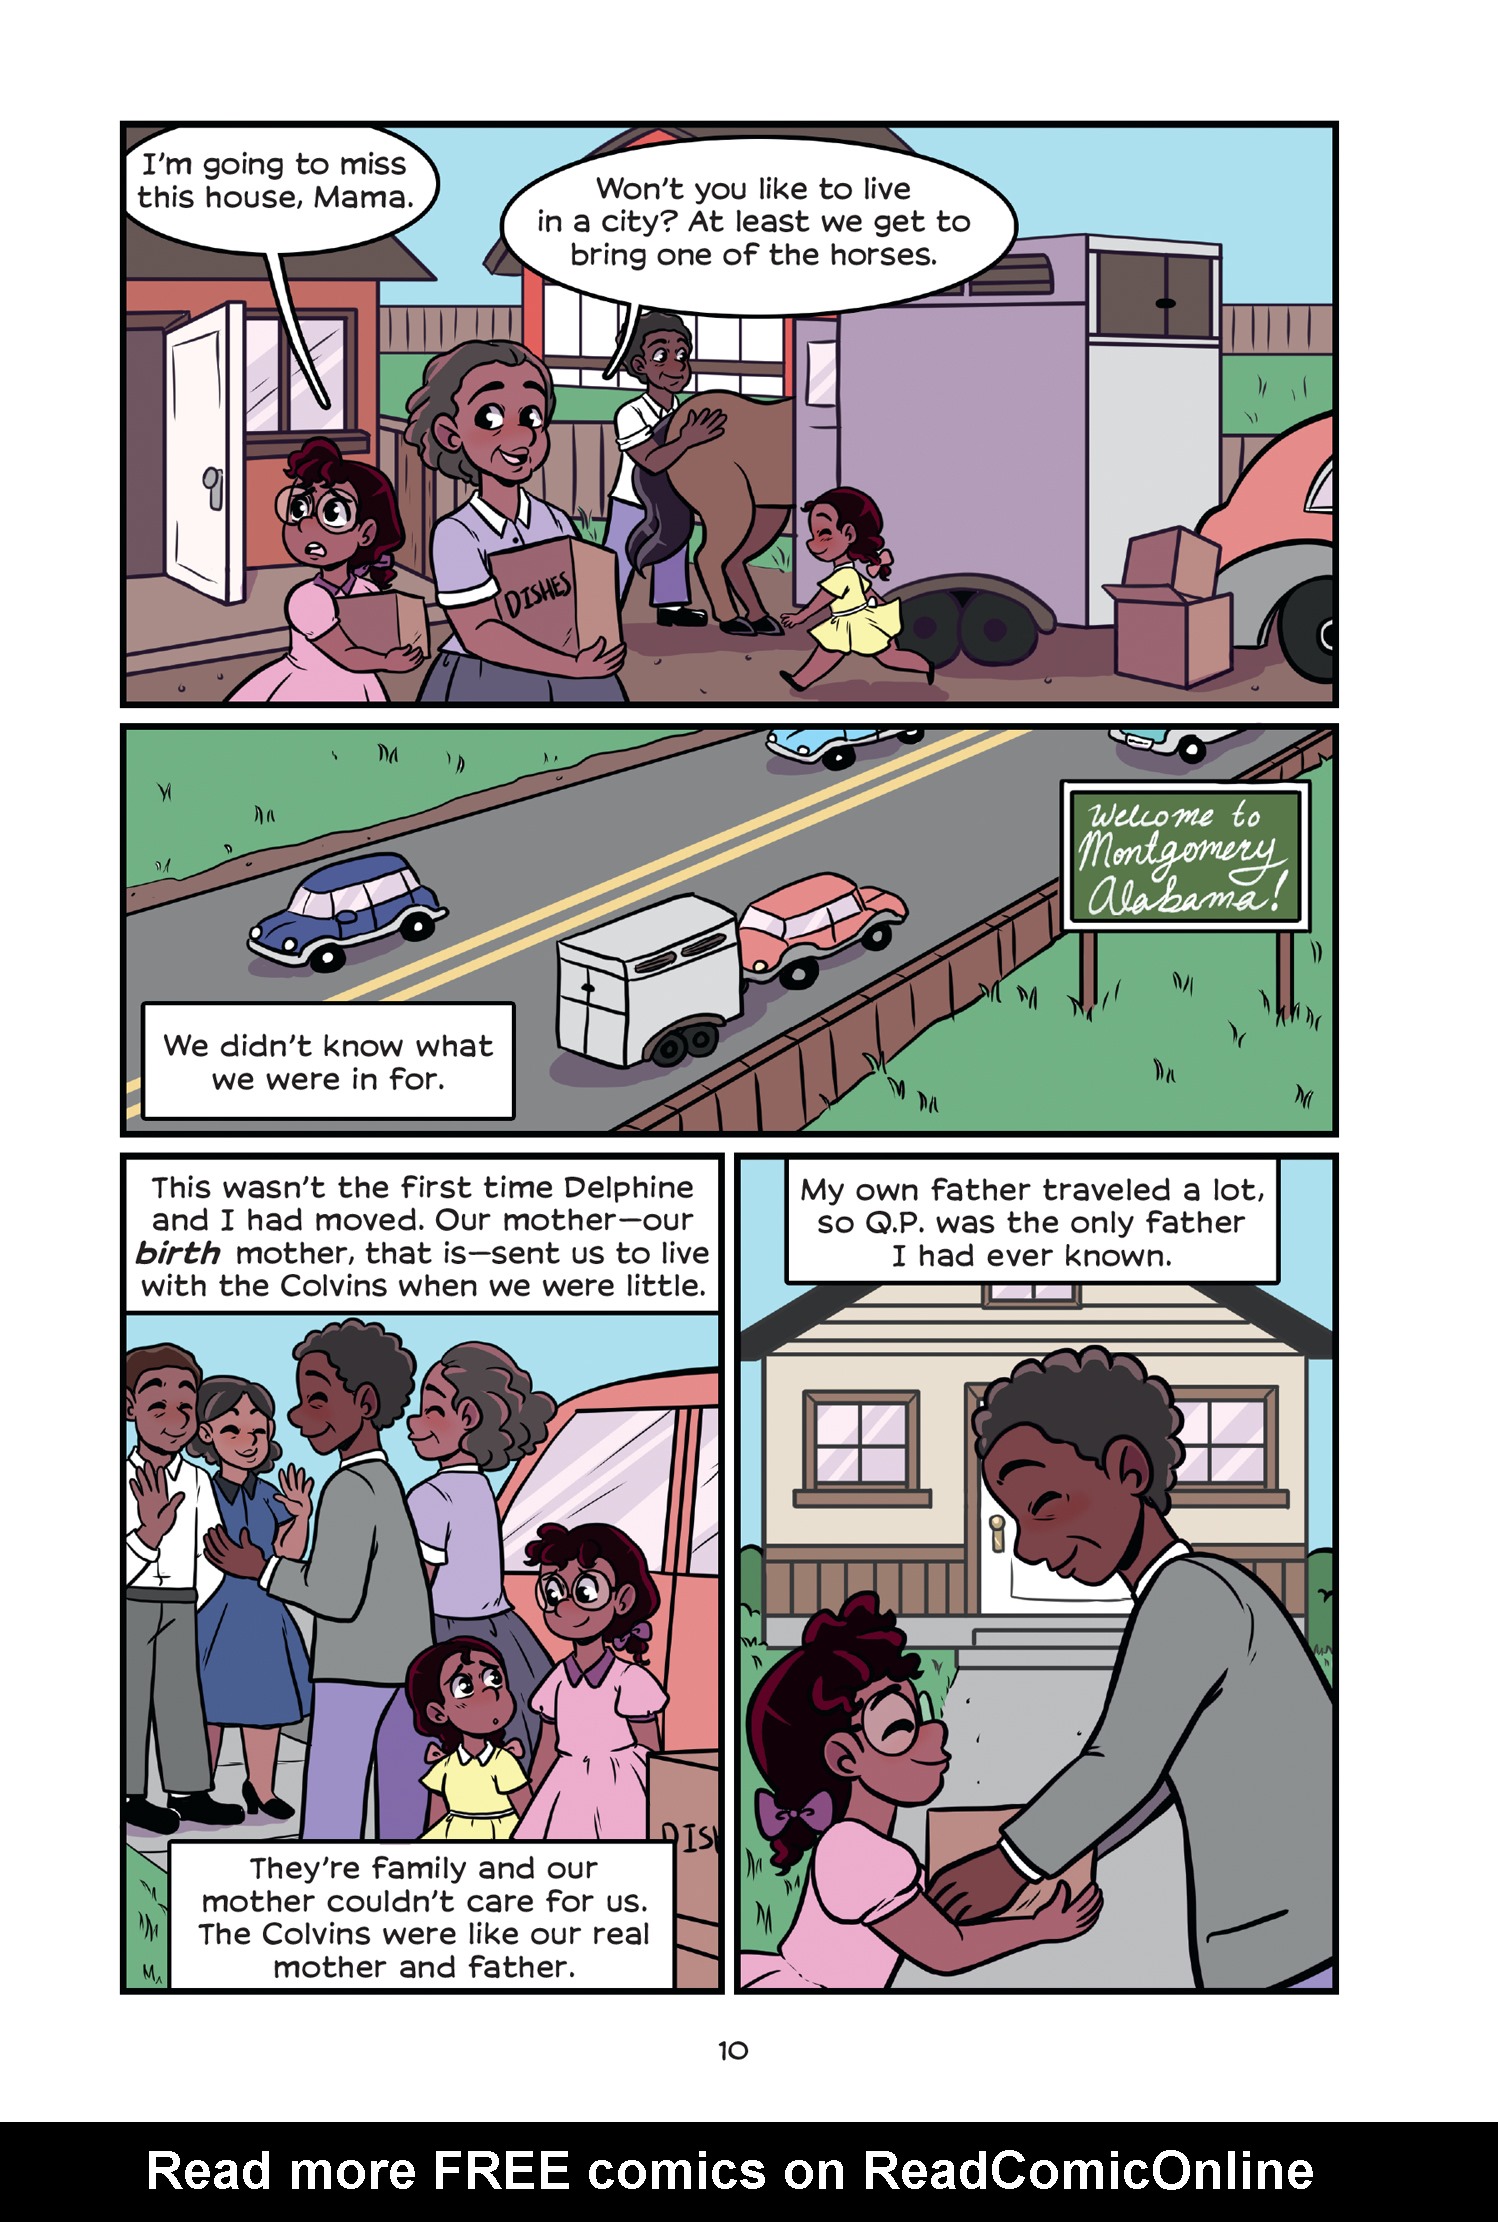 Read online History Comics comic -  Issue # Rosa Parks & Claudette Colvin - Civil Rights Heroes - 16